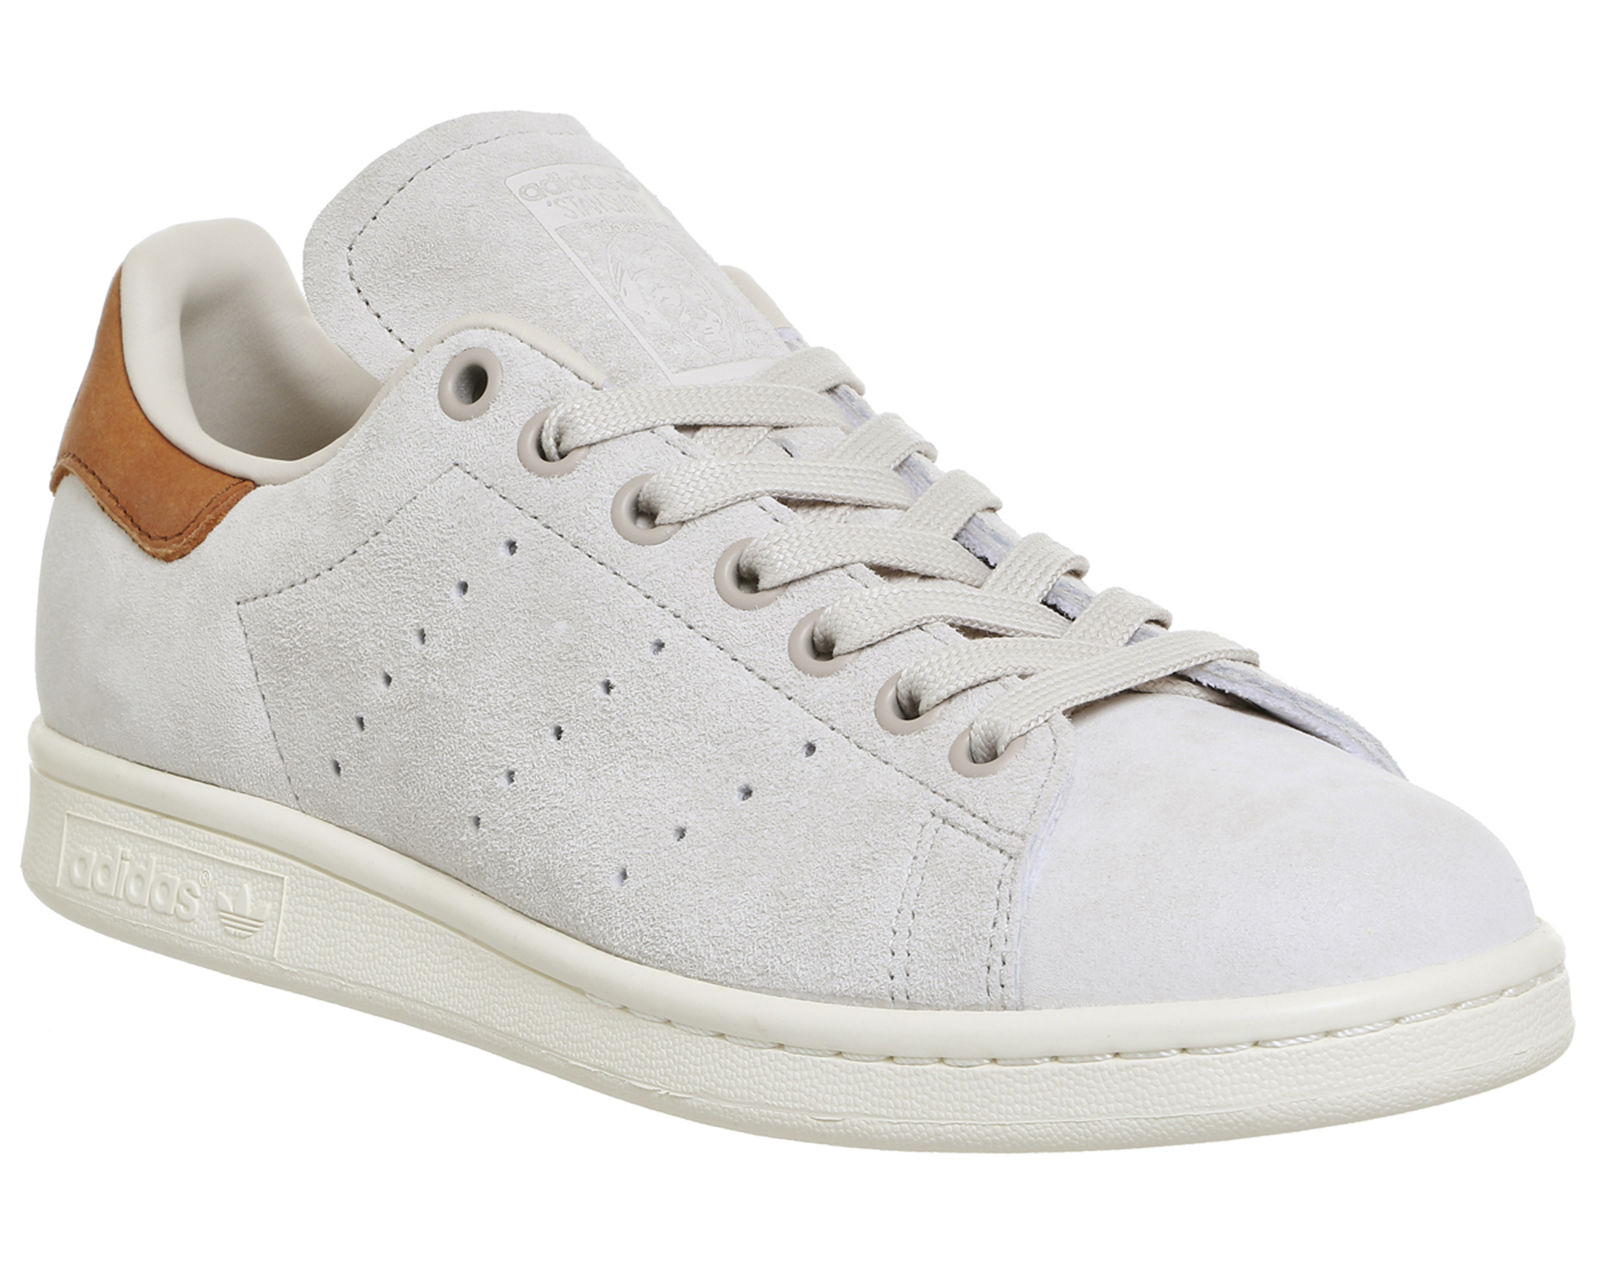 Adidas Stan Smith Off White Clear Brown Flash Sales, 57% OFF |  www.velocityusa.com